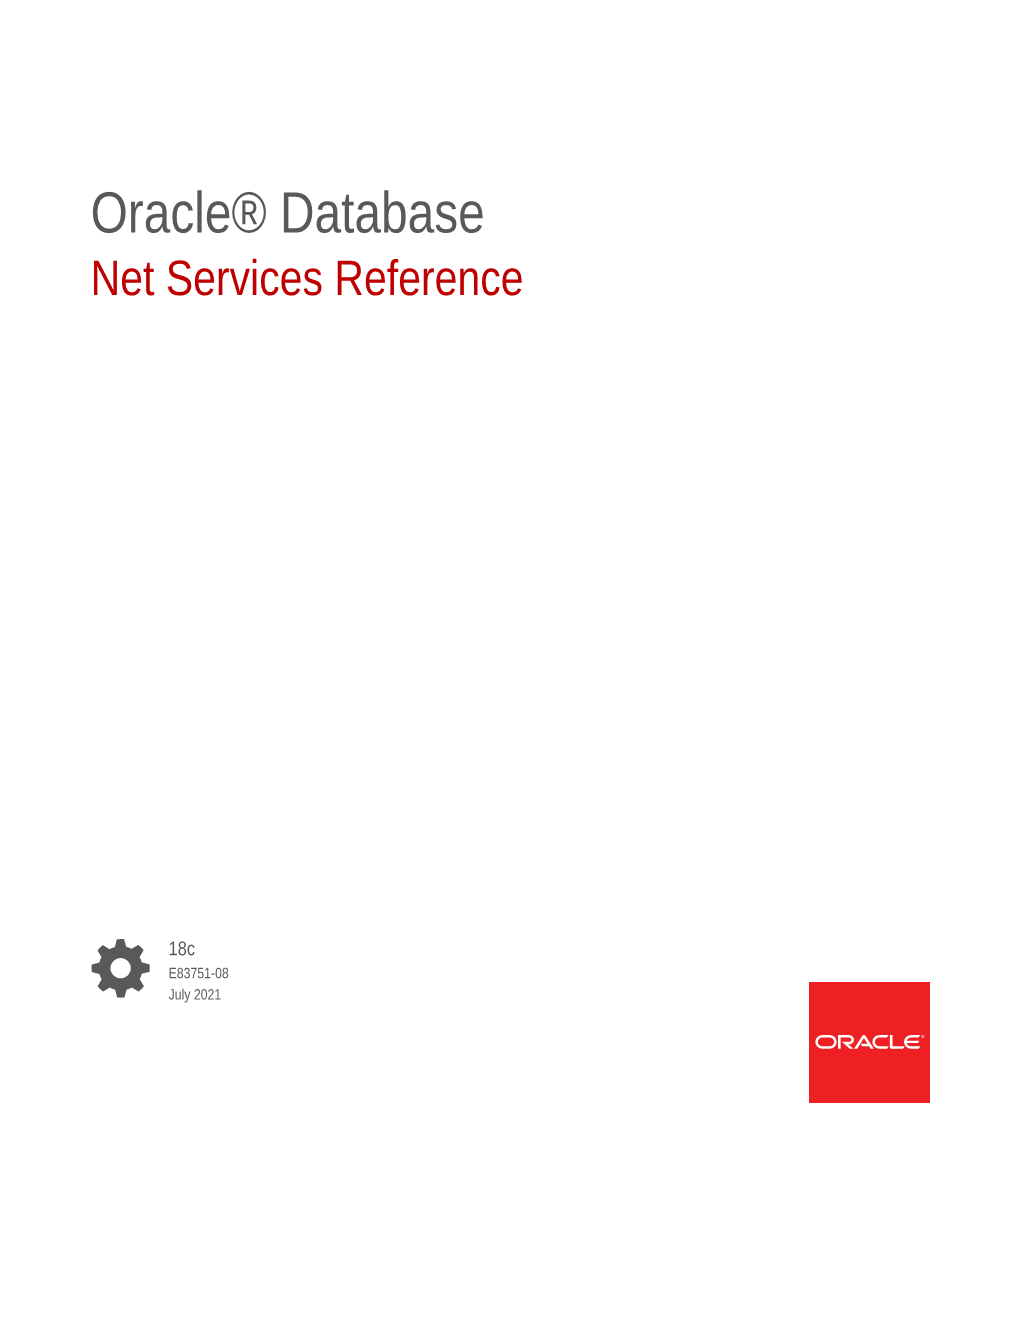 Oracle® Database Net Services Reference